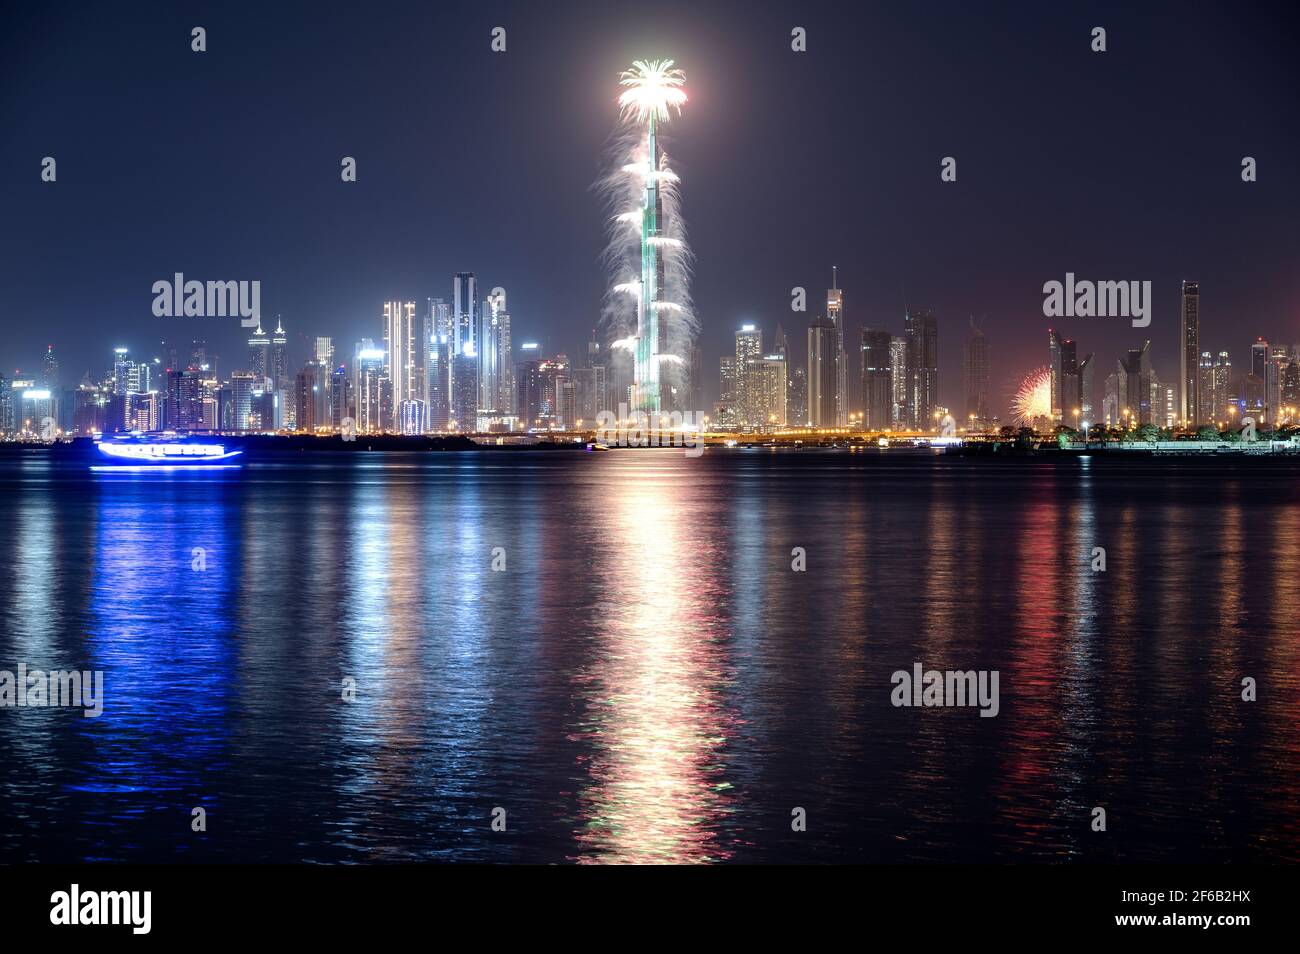 Jan 1st,2021, Dubai,uae. VIEW OF THE SPECTACULAR FIREWORKS  AT THE BURJ KHALIFA ILLUMINATED WITH THE UAE FLAG COLORS DURING THE NEW YEAR 2021 Stock Photo